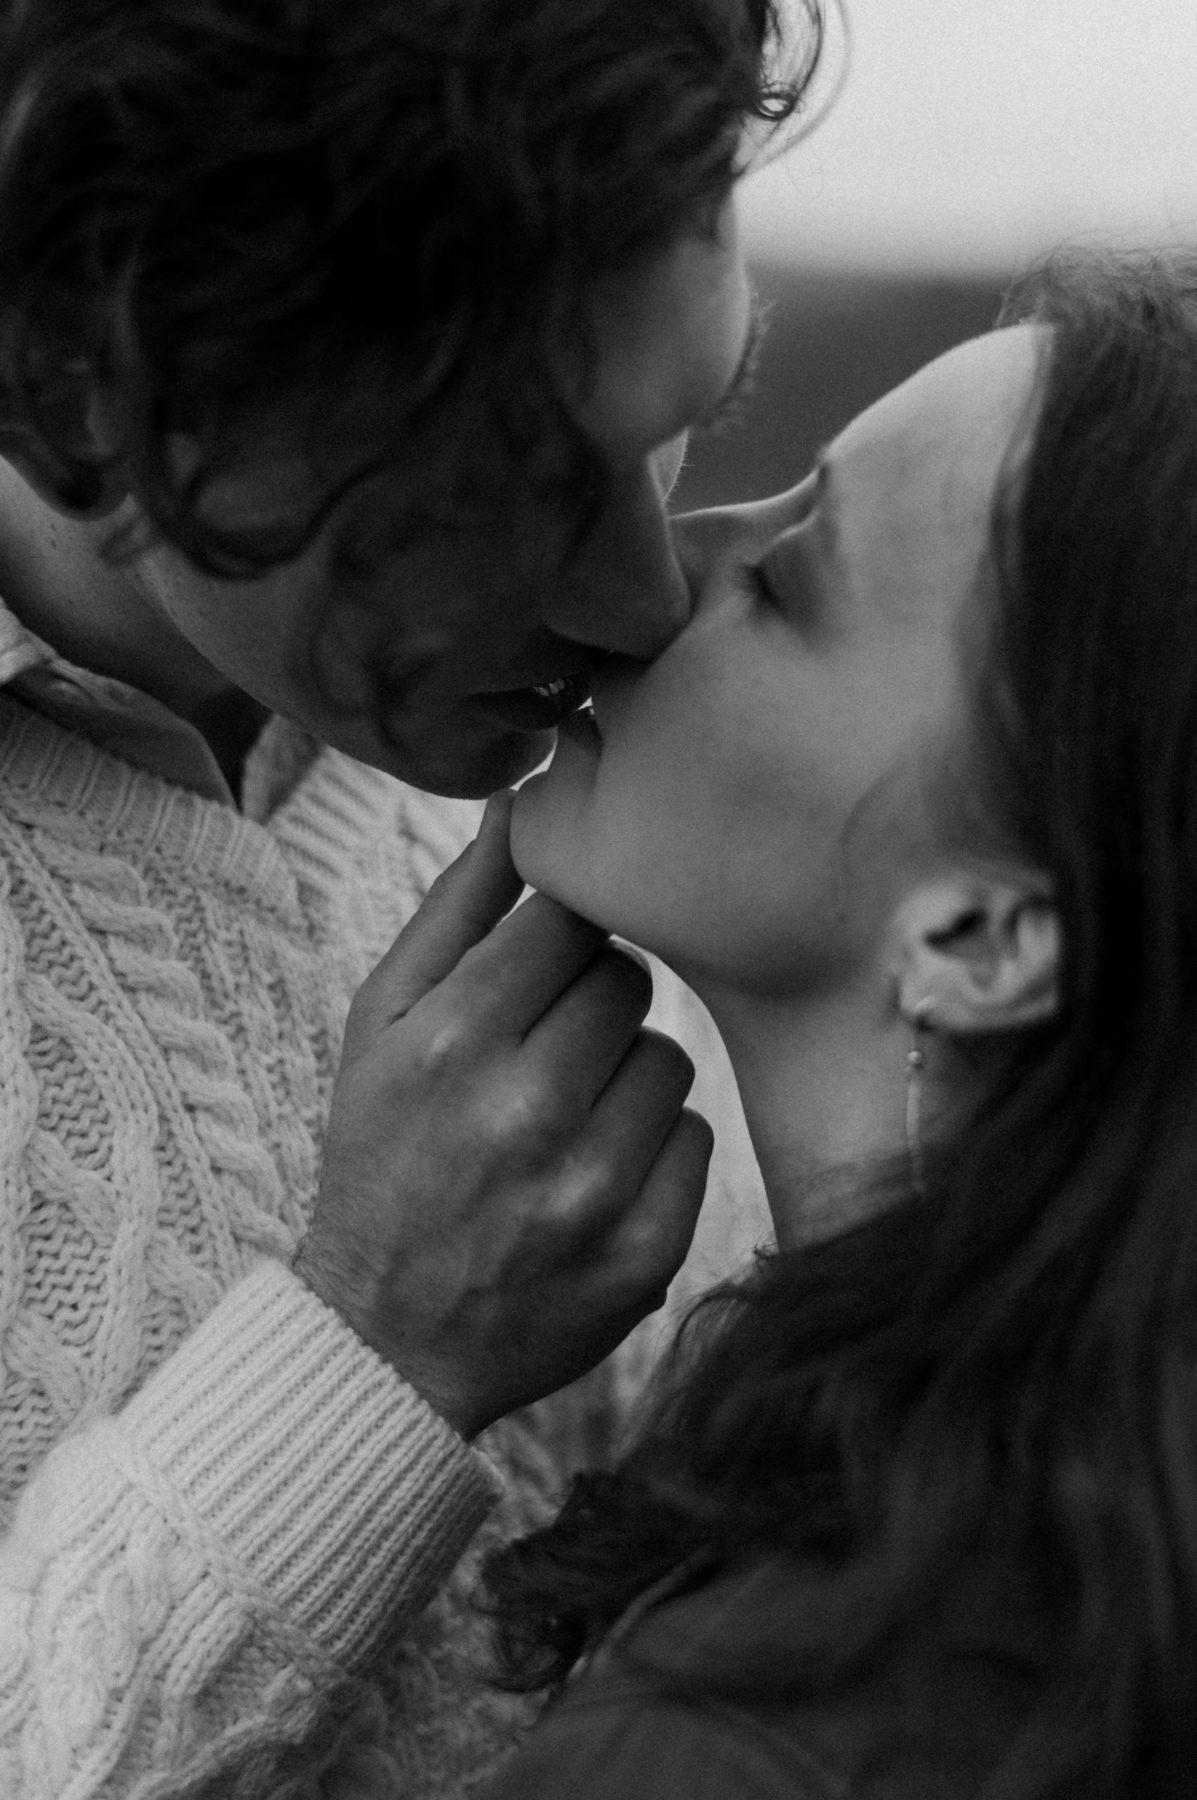 A black and white close-up of a couple sharing an intimate kiss, with the man's hand gently touching the woman's chin.